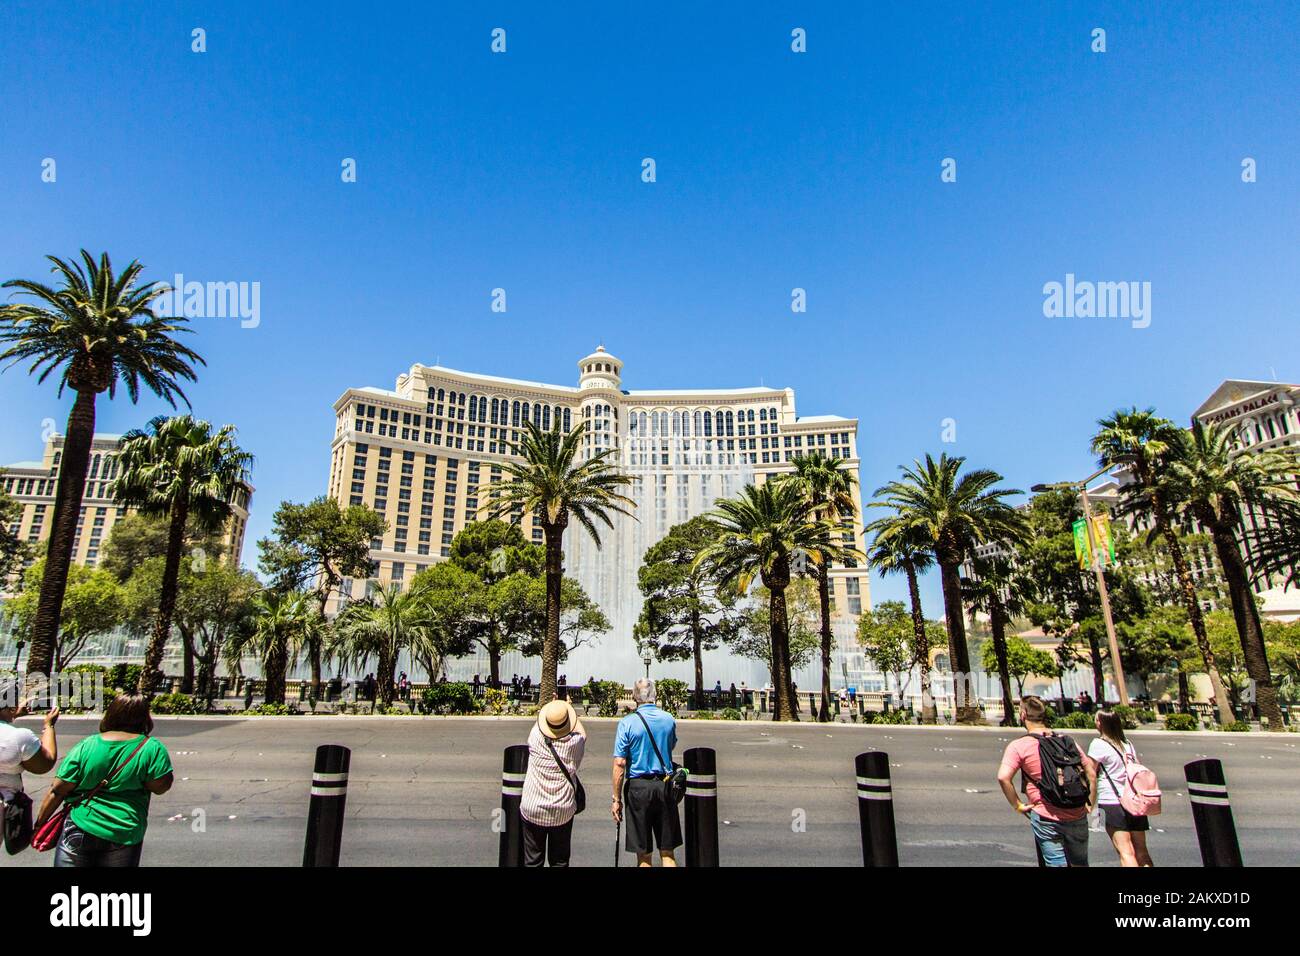 Las Vegas, Nevada, USA - May 6, 2019: Tourists standing on sidewalk with back to camera talking pictures of the Bellagio Fountains on the Las Vegas Stock Photo